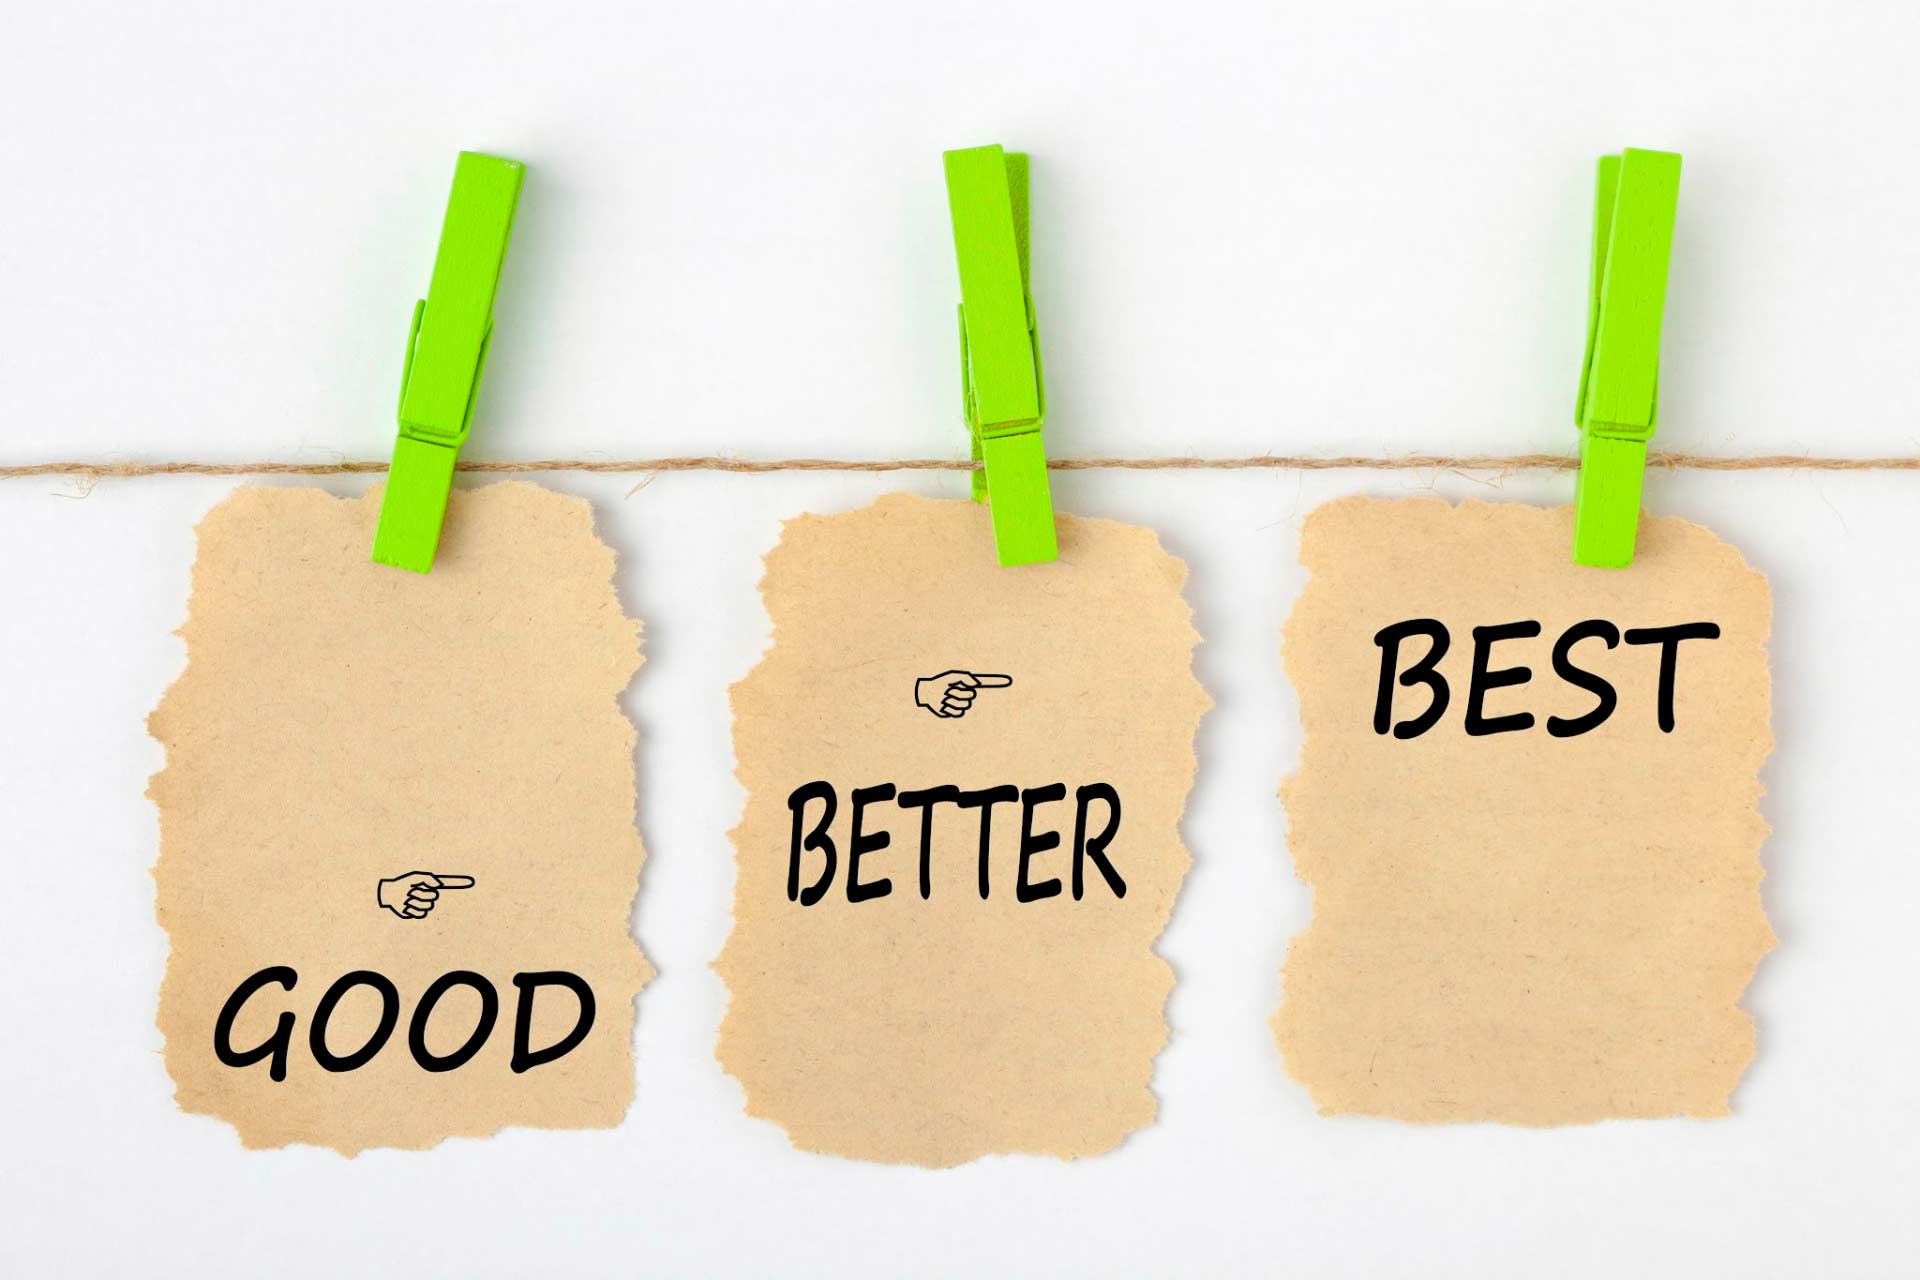 Clothesline with 3 signs saying “Good,” “Better,” and “Best,” symbolizing the challenge of finding the best solution for sleep.